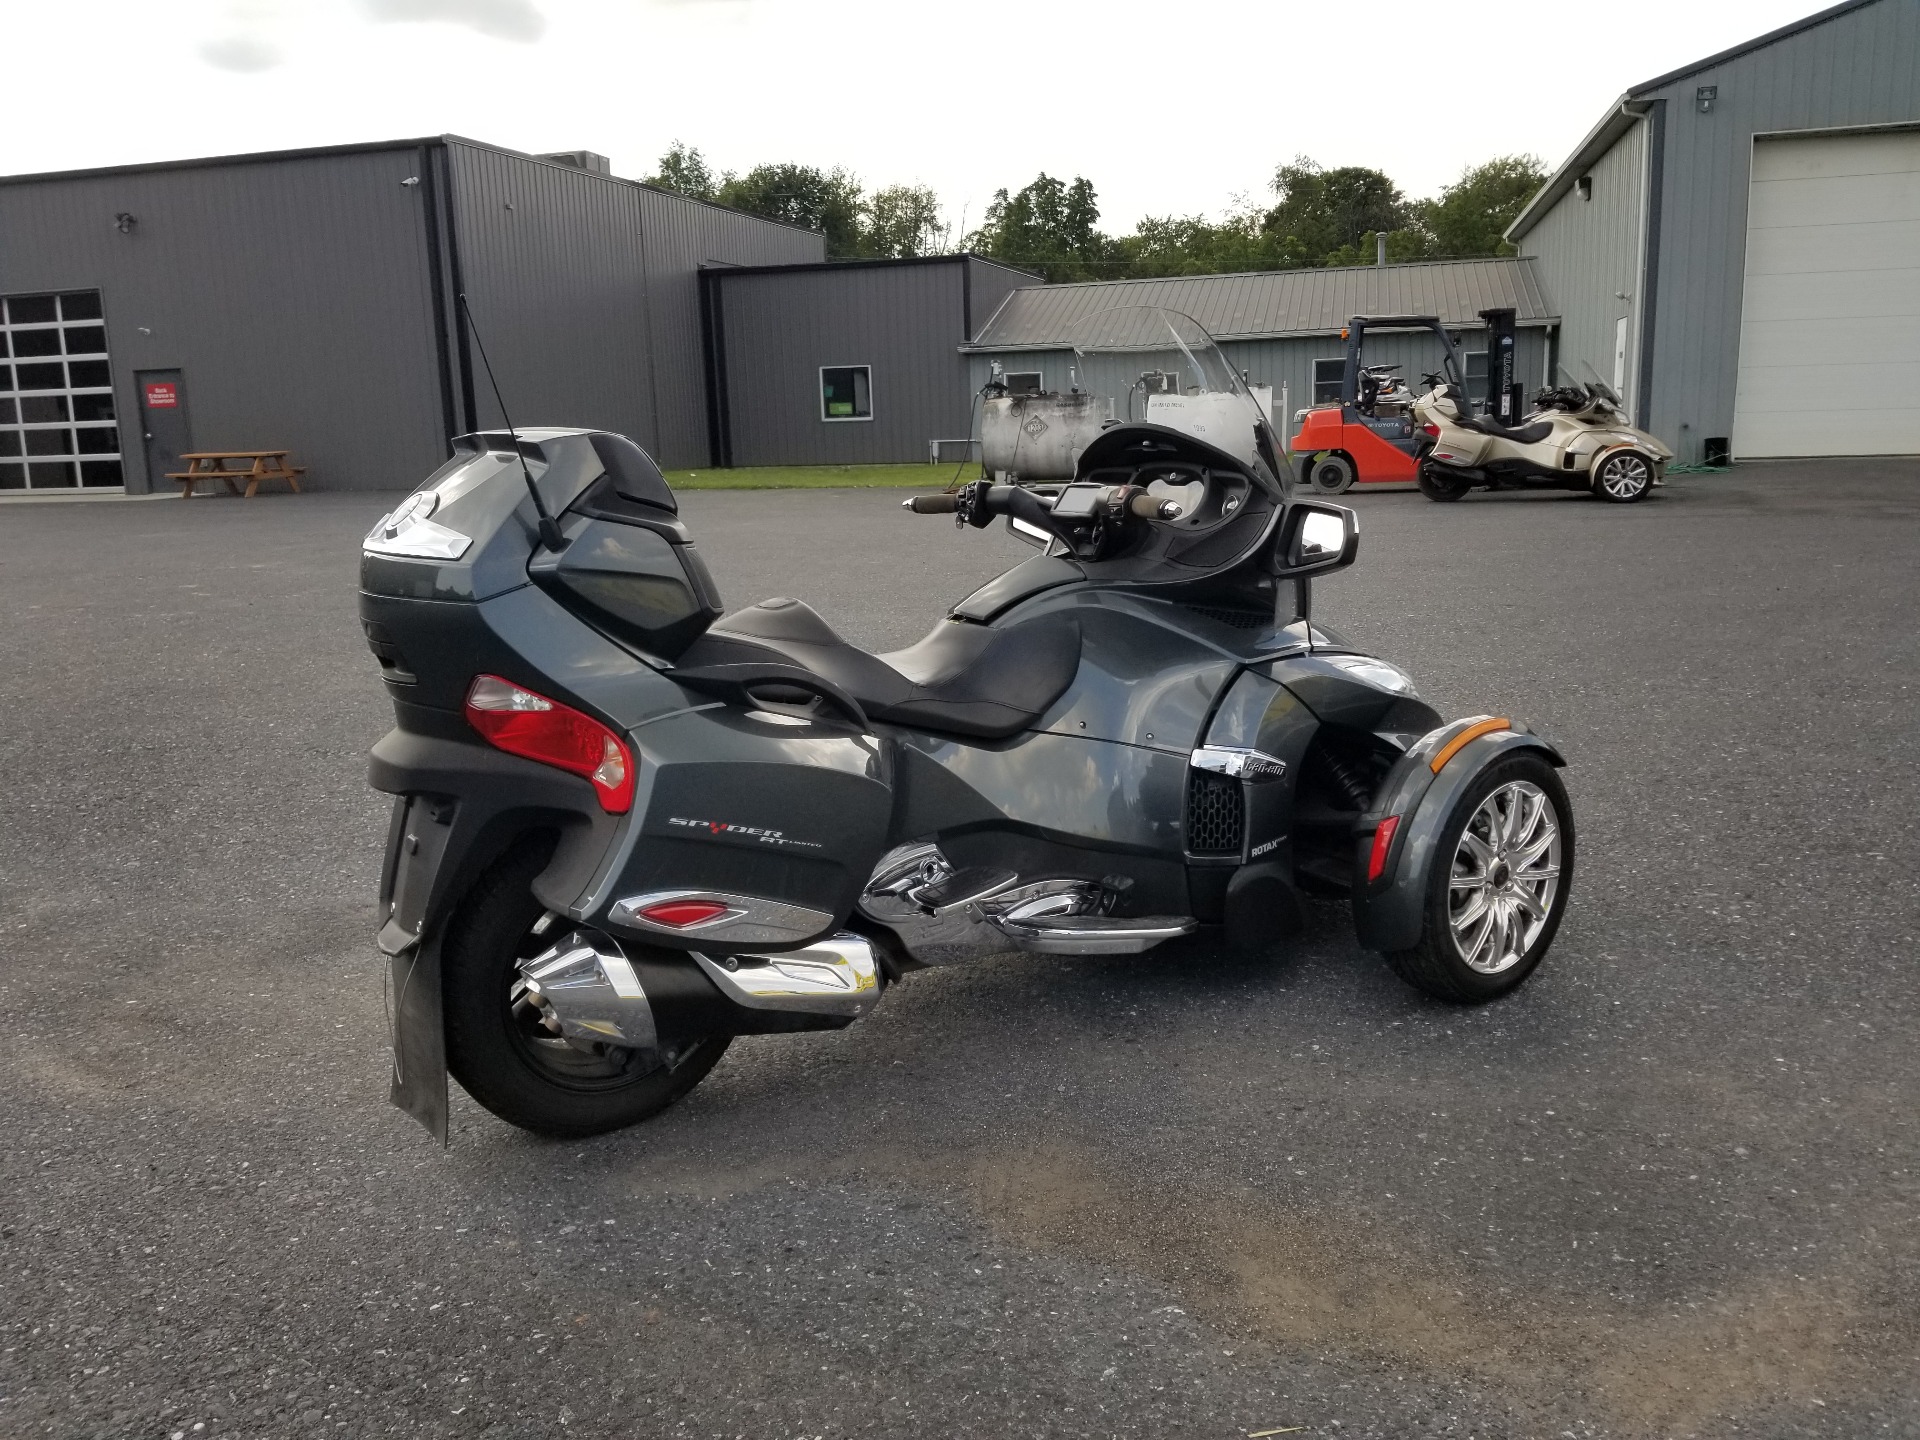 2017 Can-Am Spyder RT Limited in Grantville, Pennsylvania - Photo 6